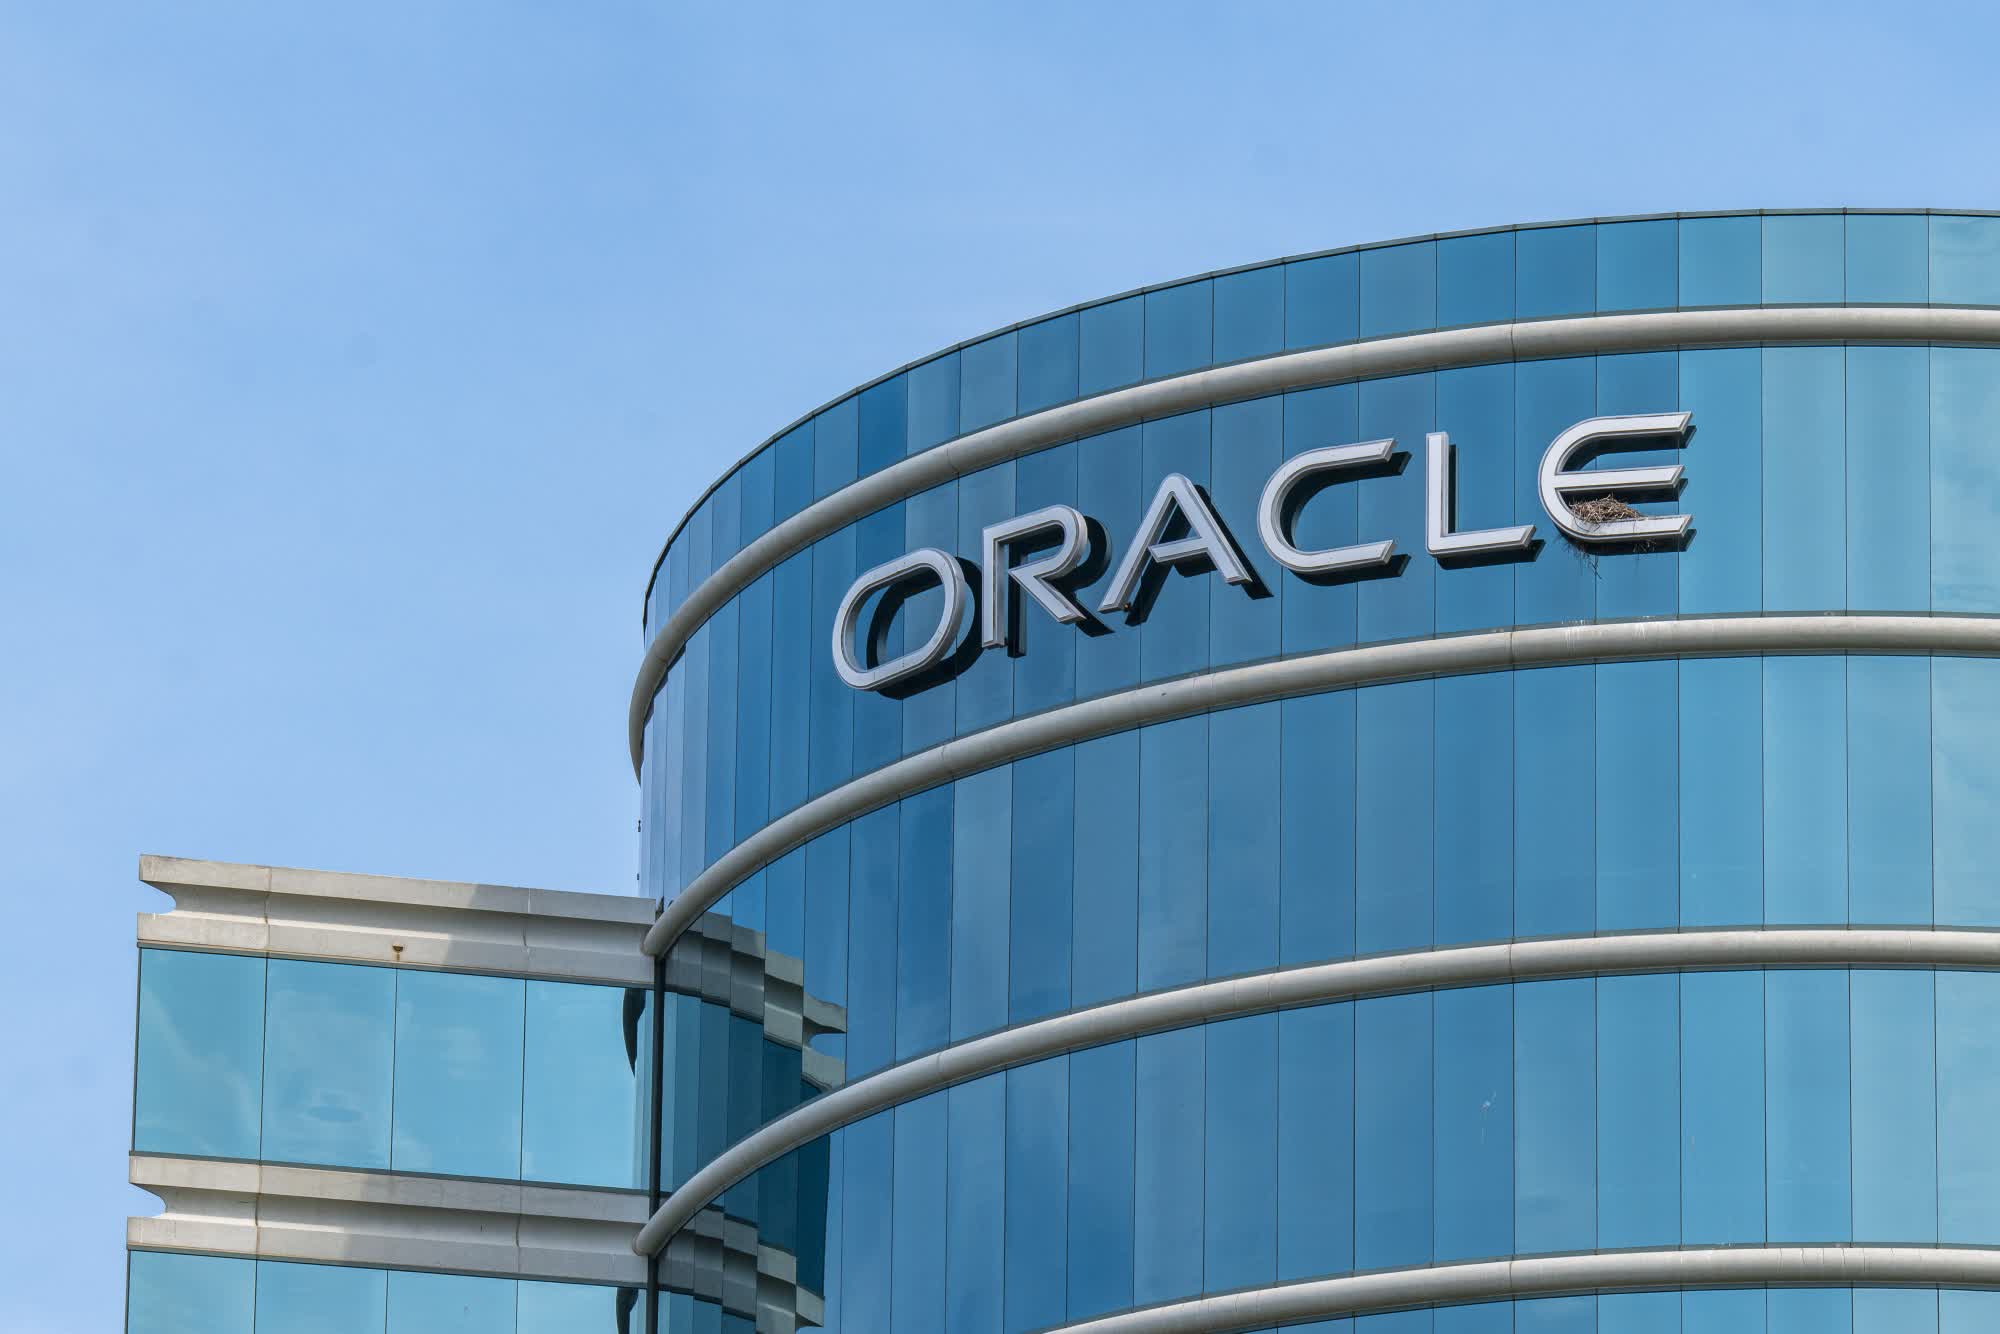 Larry Ellison says Oracle plans to spend billions on Nvidia GPUs, even more on Ampere and AMD chips